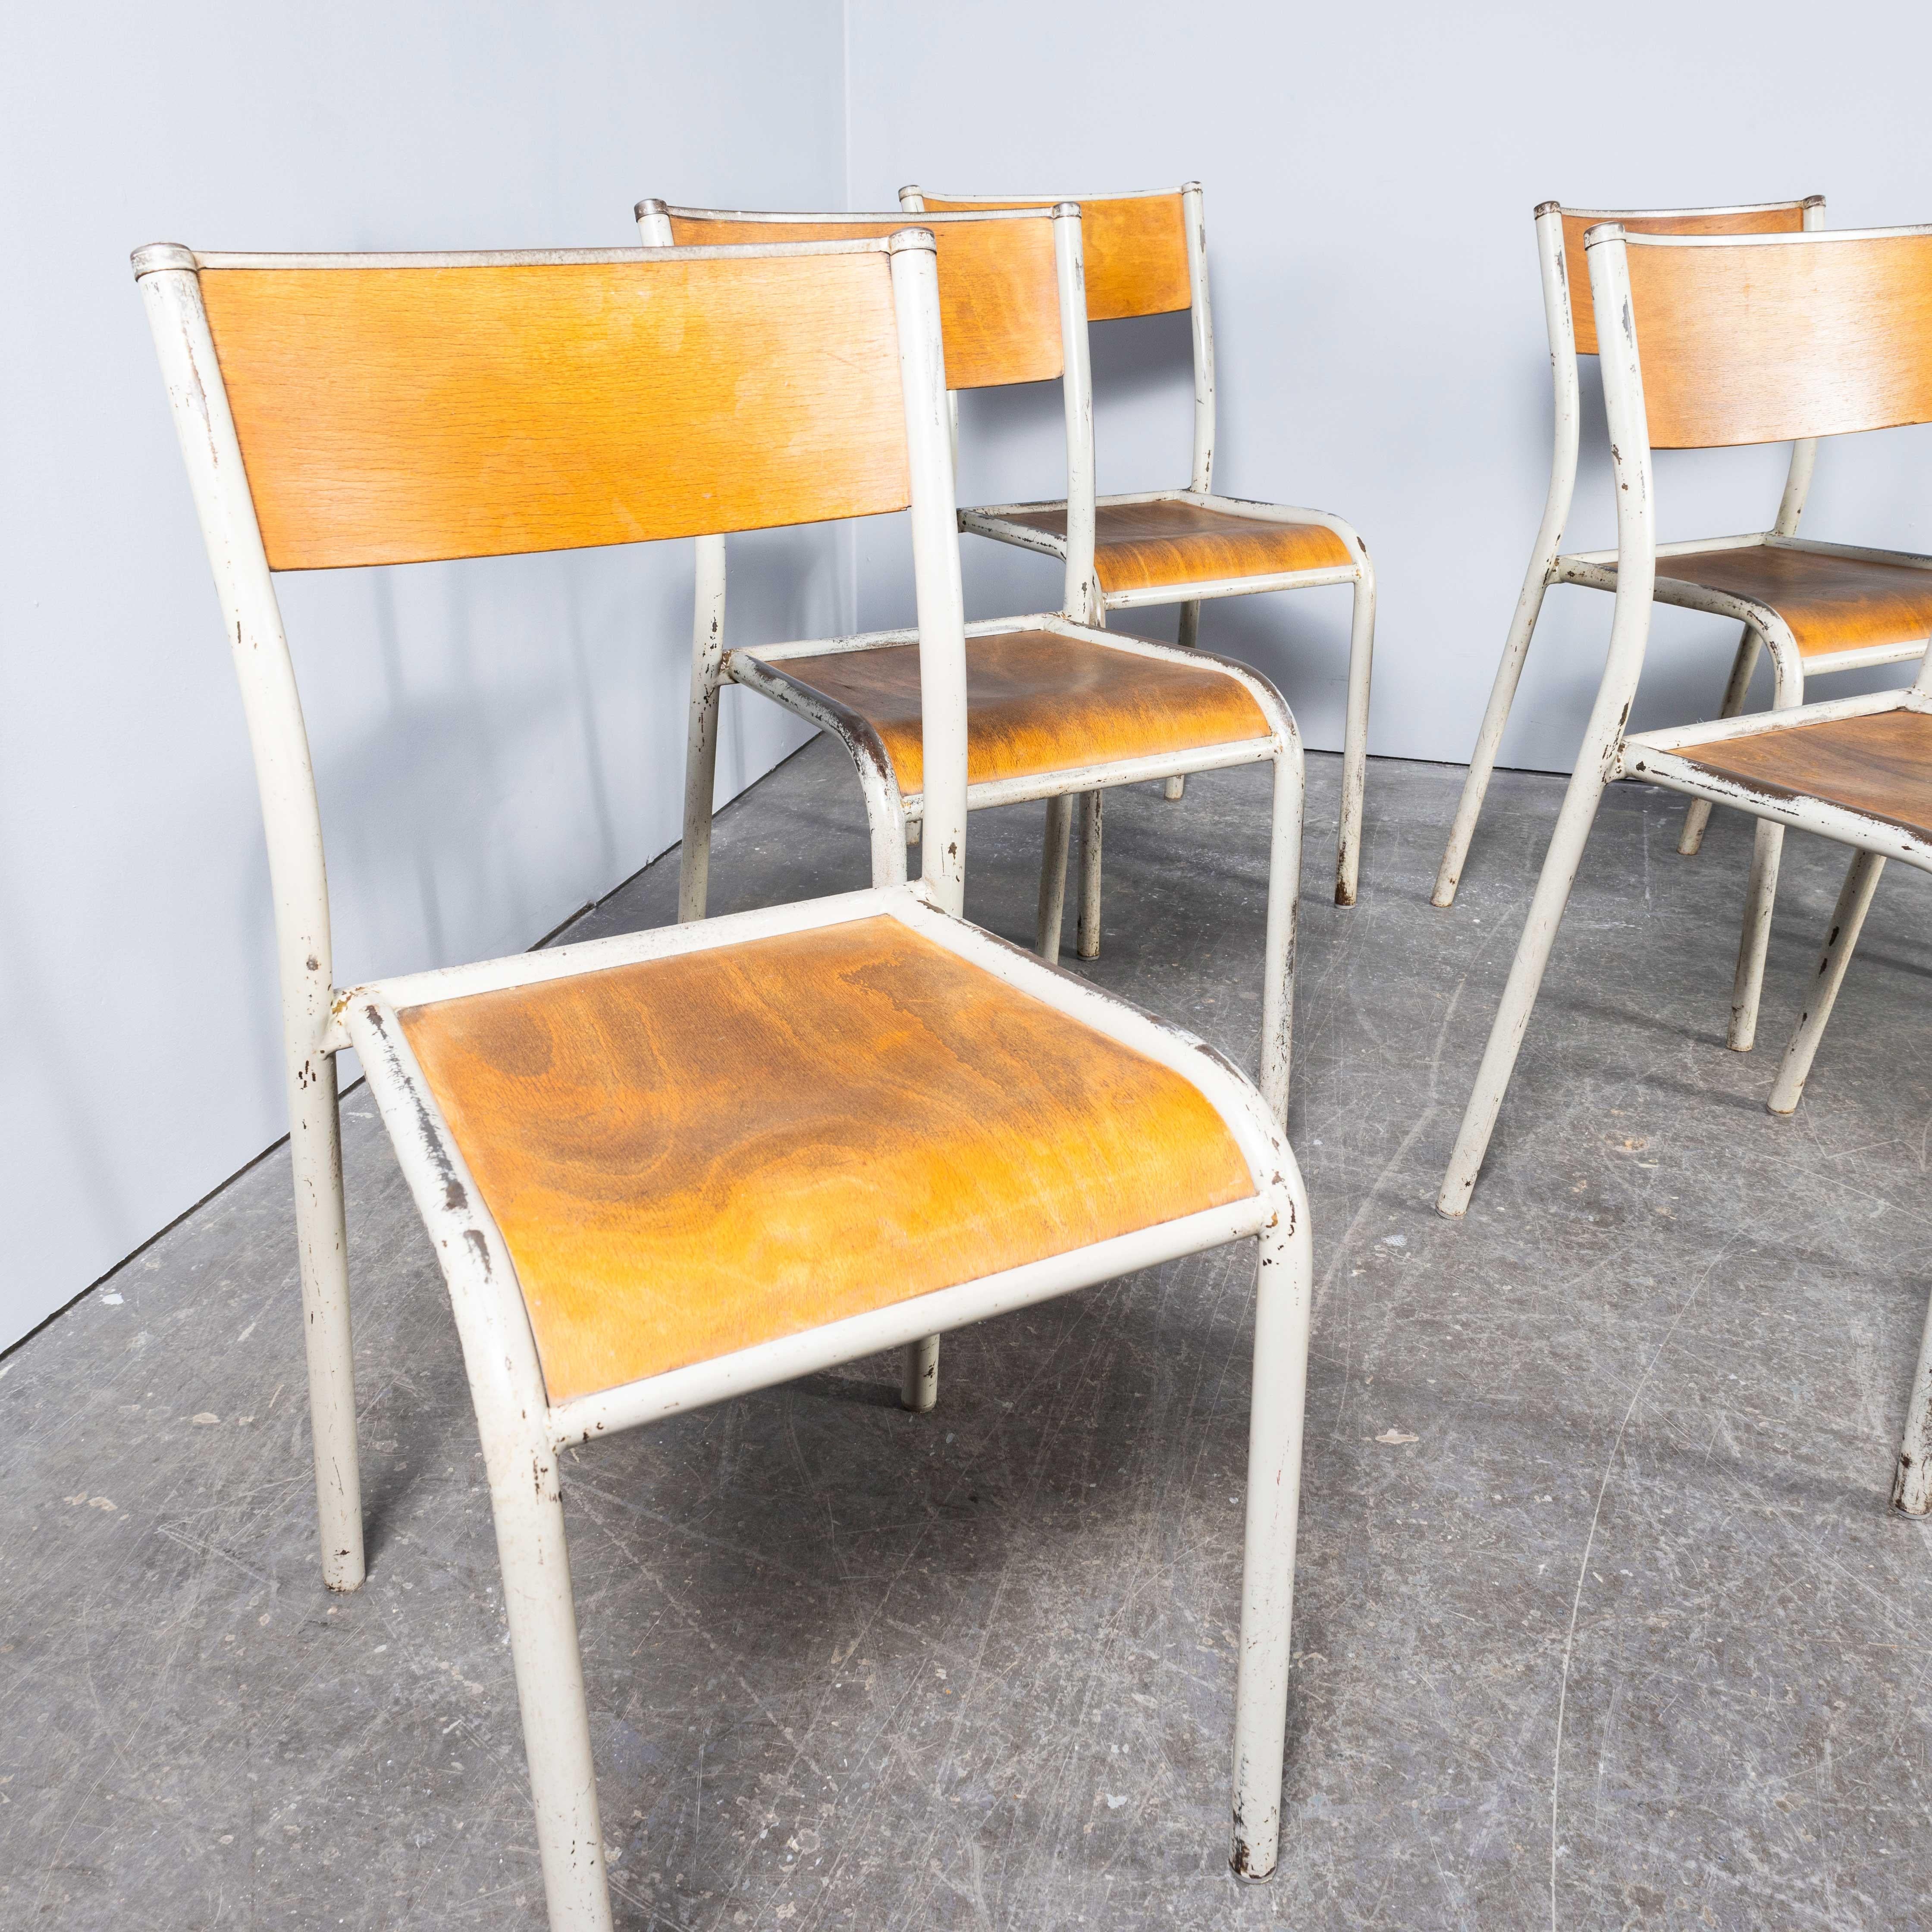 1950’s French Mullca Stacking – Dining Chairs – Light Grey 510 – Large Quantities Available
1950’s French Mullca Stacking – Dining Chairs – Light Grey 510 – Large Quantities Available. One of our most favourite chairs, in 1947 Robert Muller and